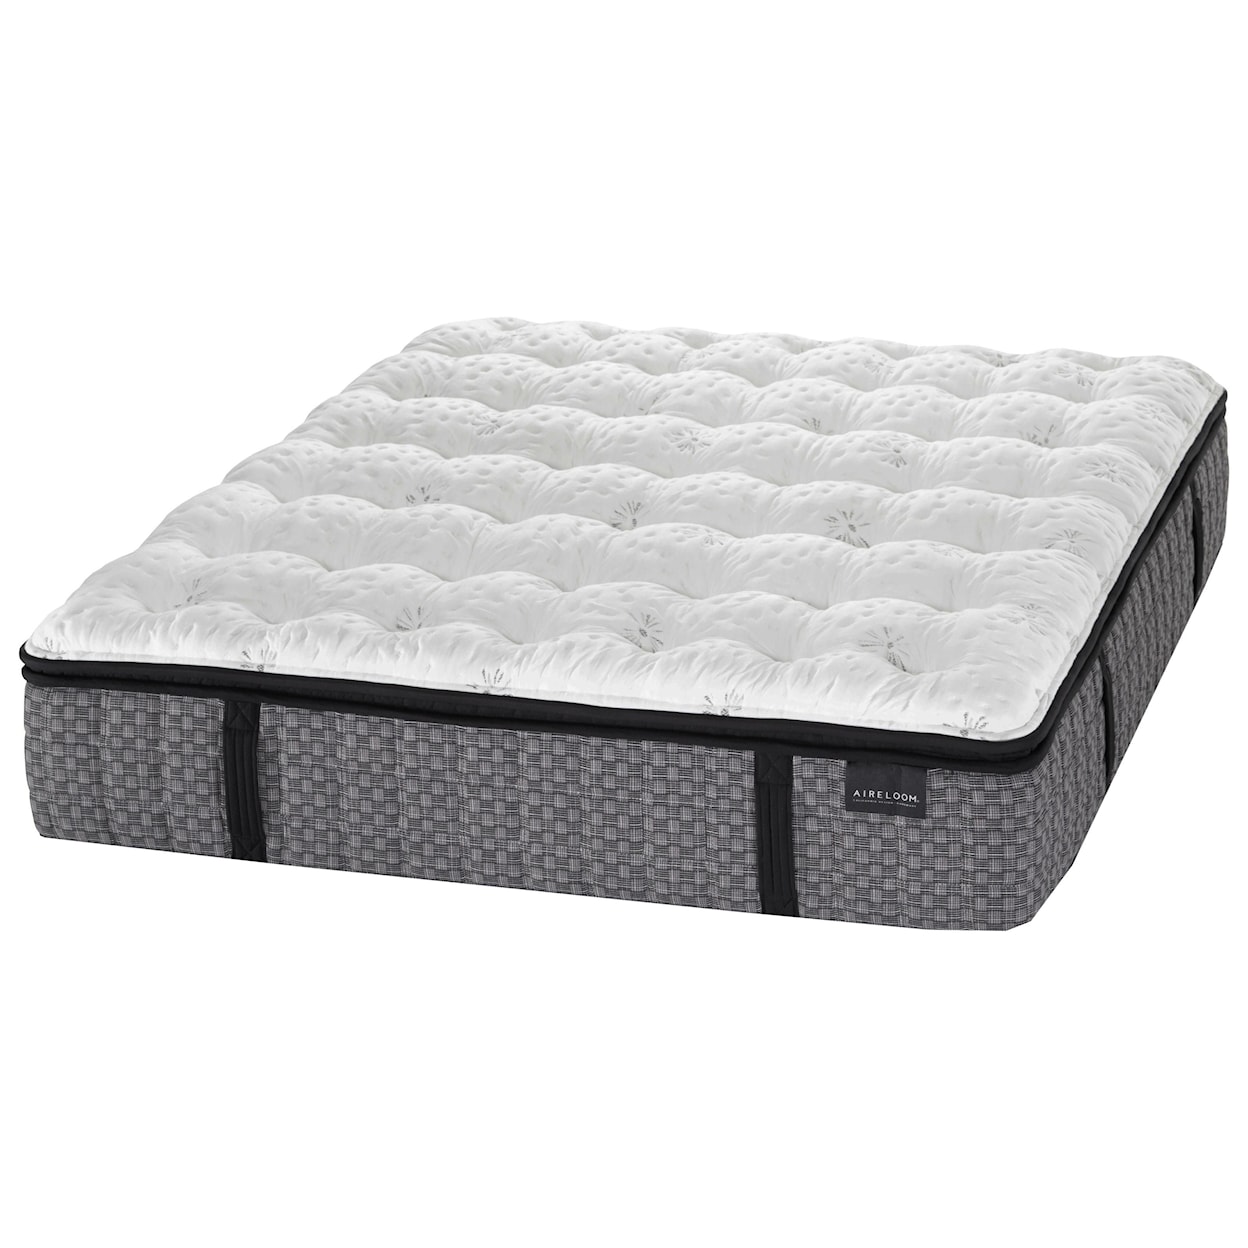 Aireloom Bedding Humbolt Plush Cal King Coil on Coil Mattress